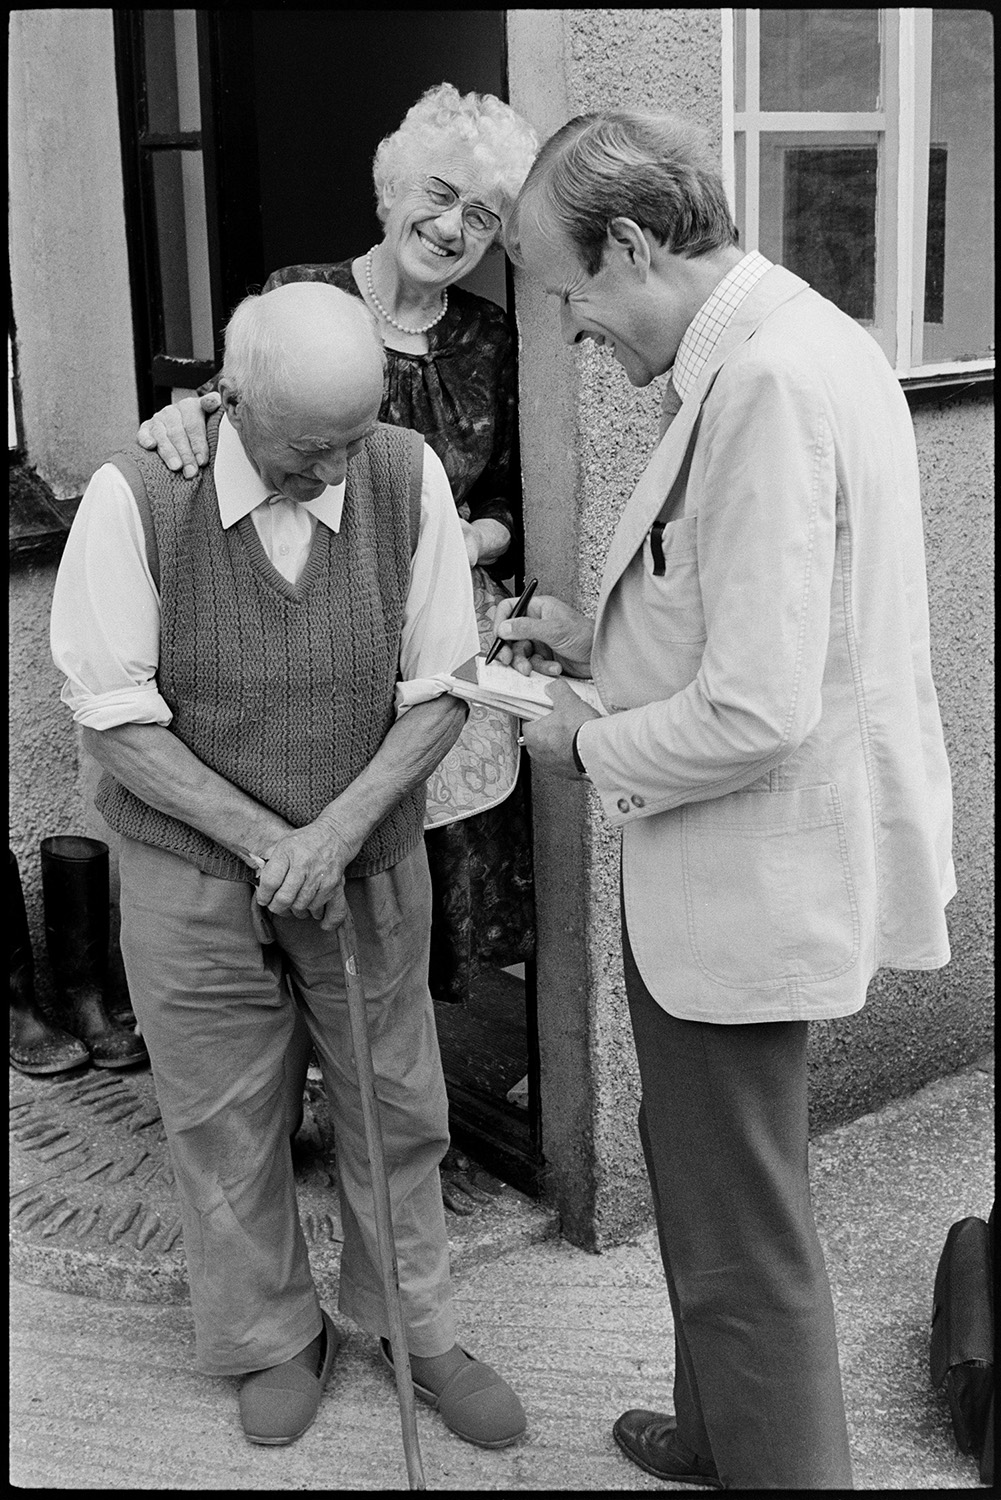 Doctor talking to elderly man and woman on his rounds.
[Doctor Richard Westcott talking to a man and woman in their doorway while on his rounds. He is writing in his notebook.]